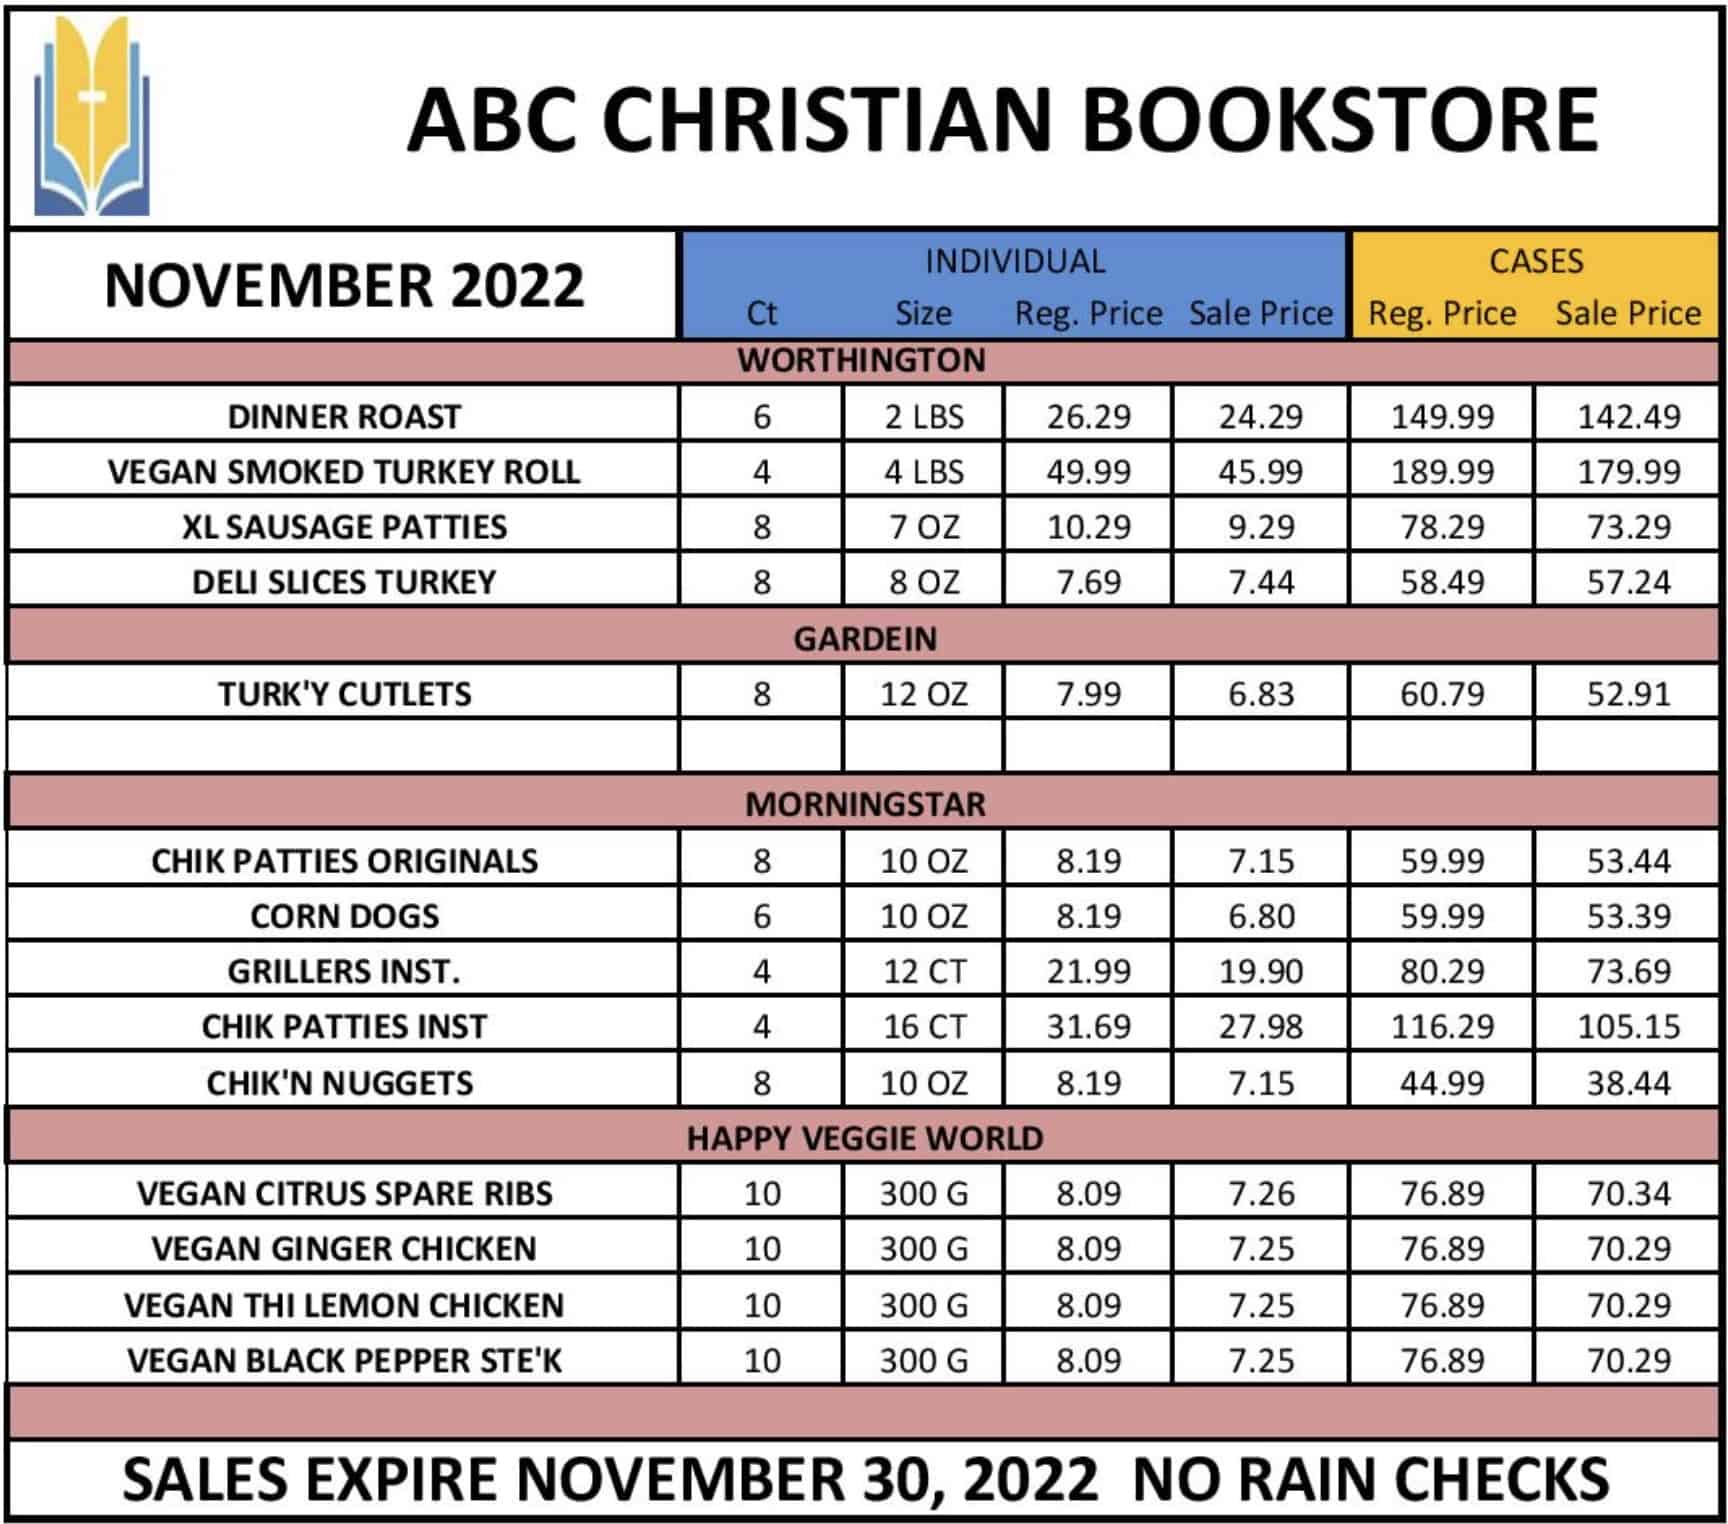 November 2022 food list from ABC Christian Bookstore